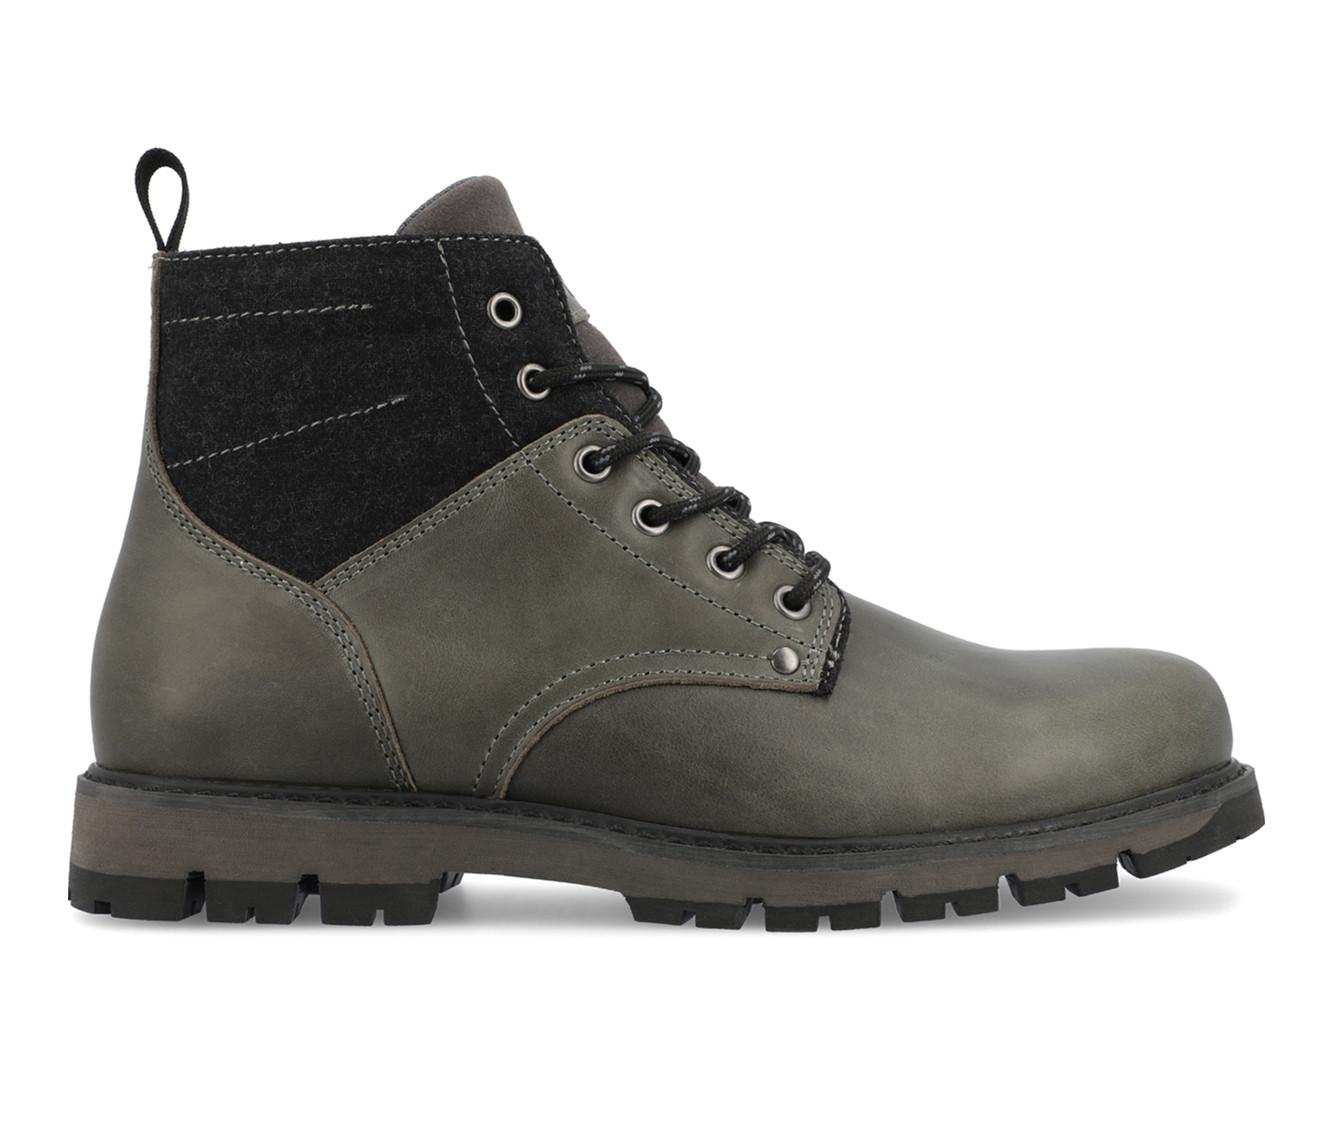 Men's Territory Redline Lace Up Boots